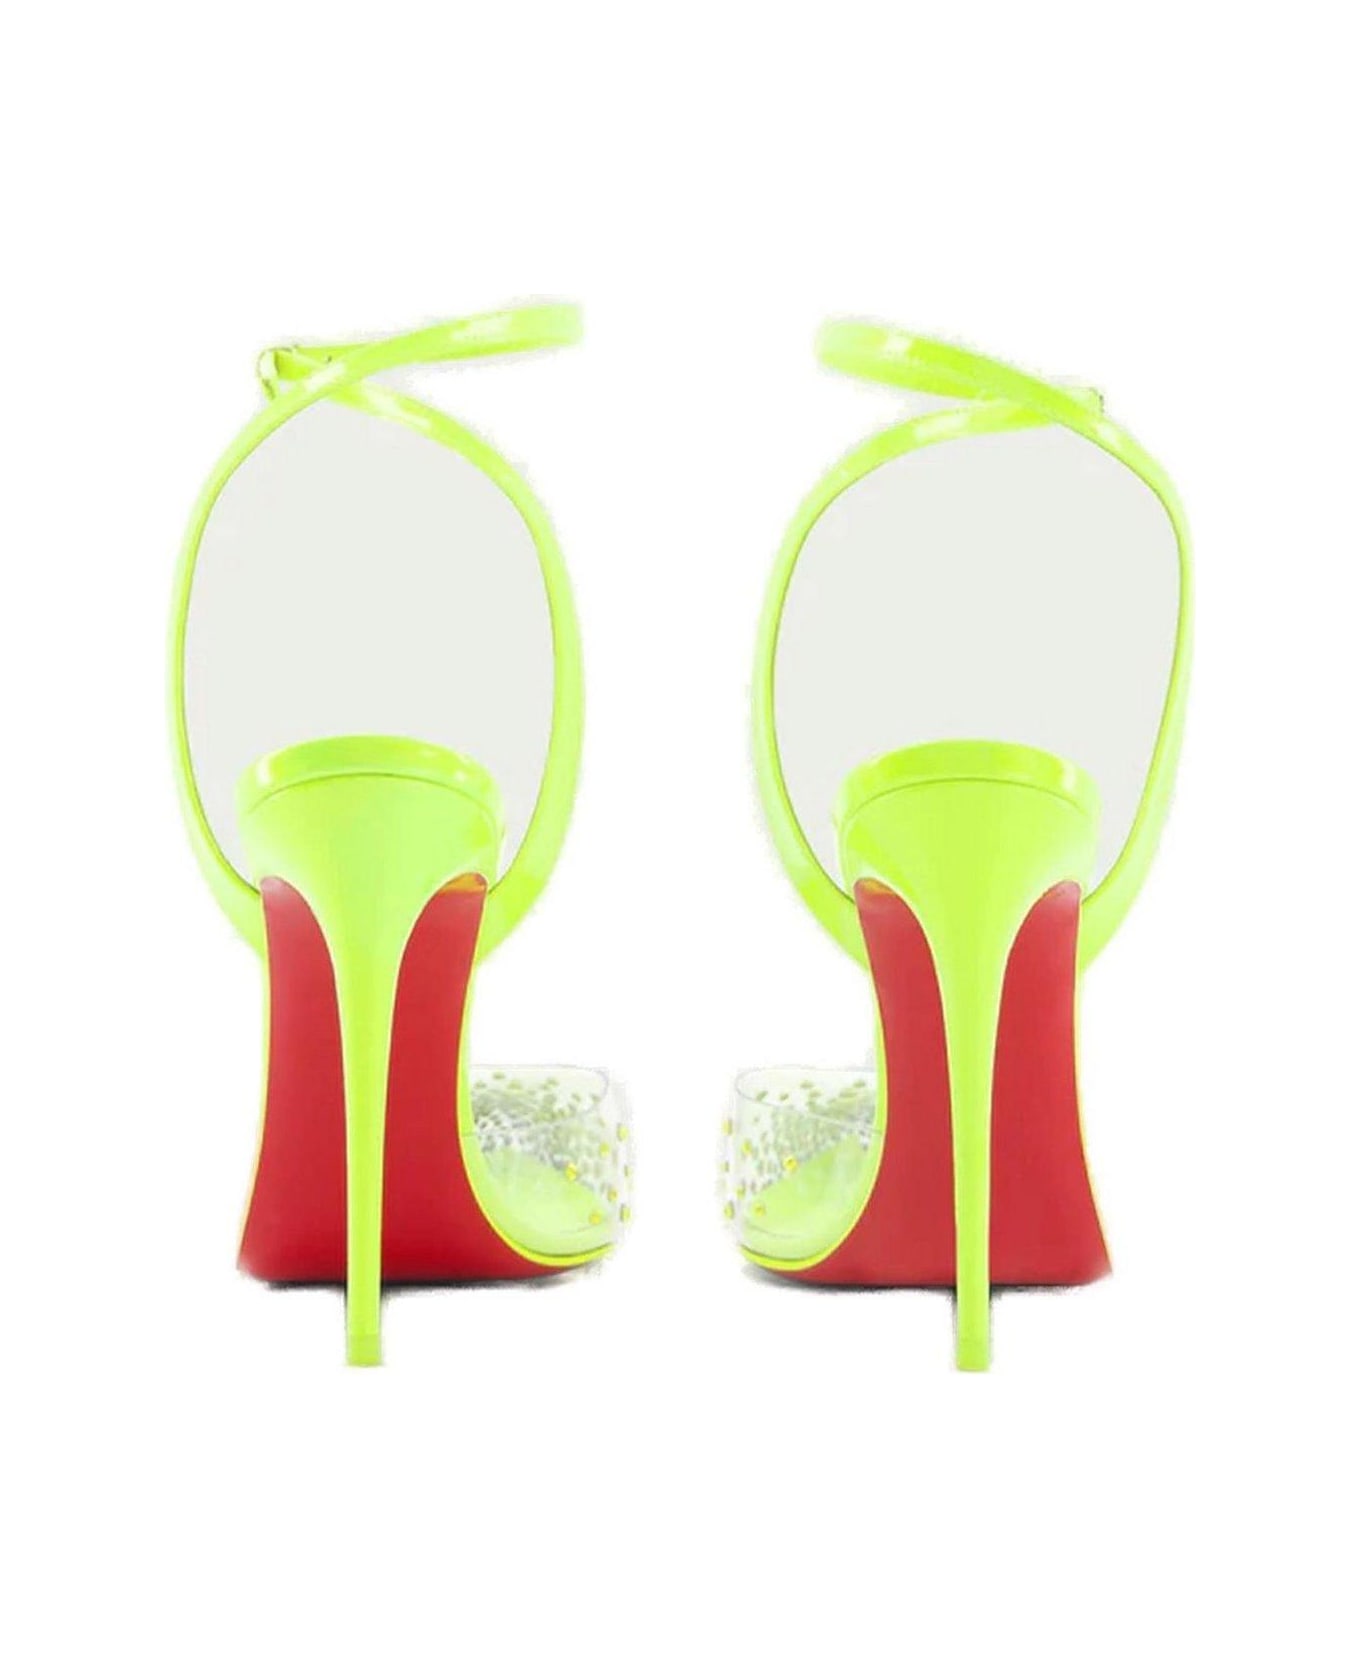 Christian Louboutin Spikaqueen Pointed Toe Pumps - Yellow